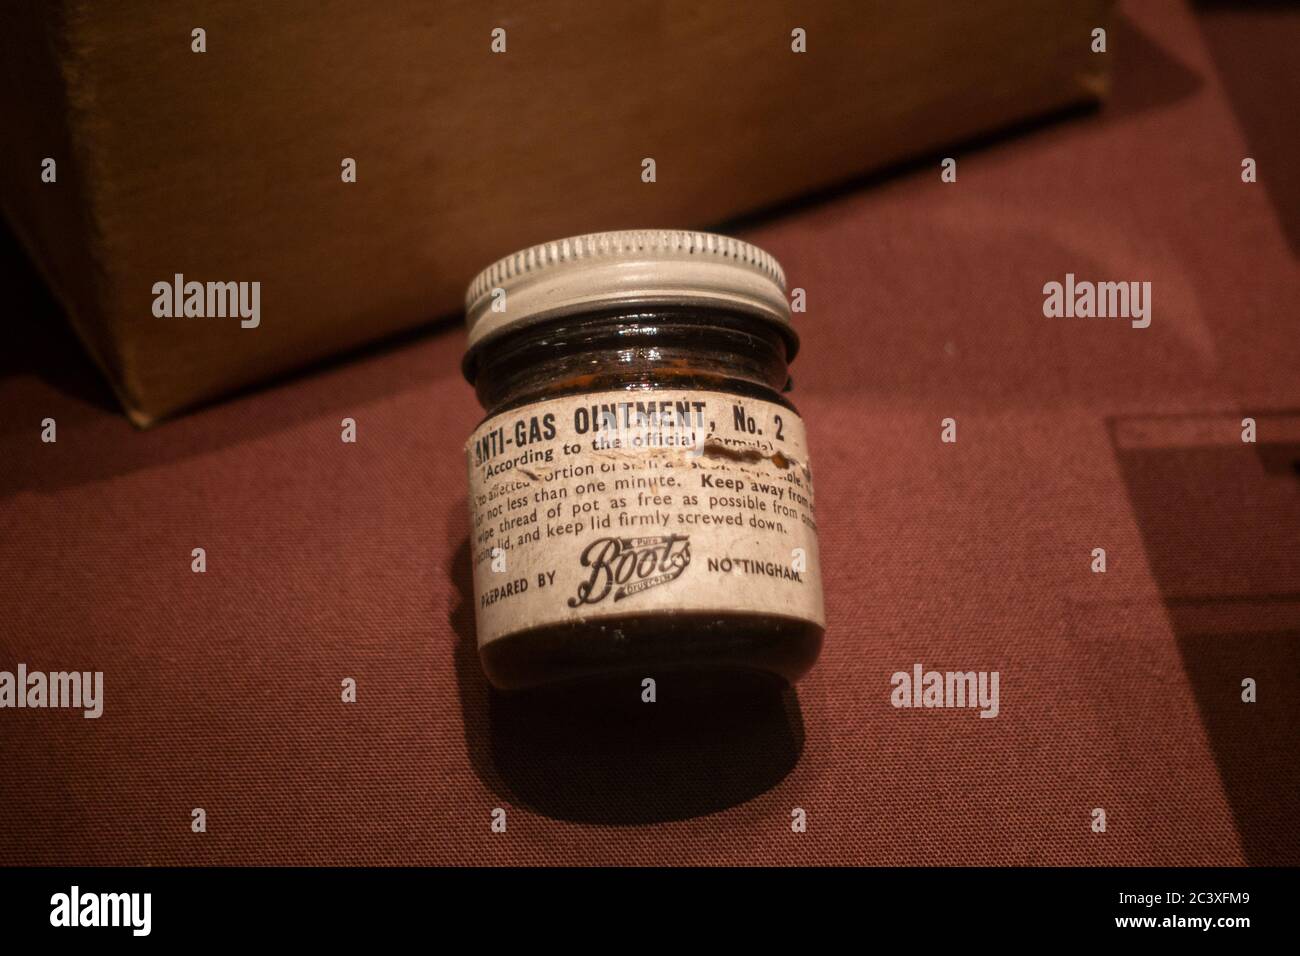 A jar of Boots Anti-Gas Ointment No 2, on display in Bletchley Park, Bletchley, Buckinghamshire, UK. Stock Photo